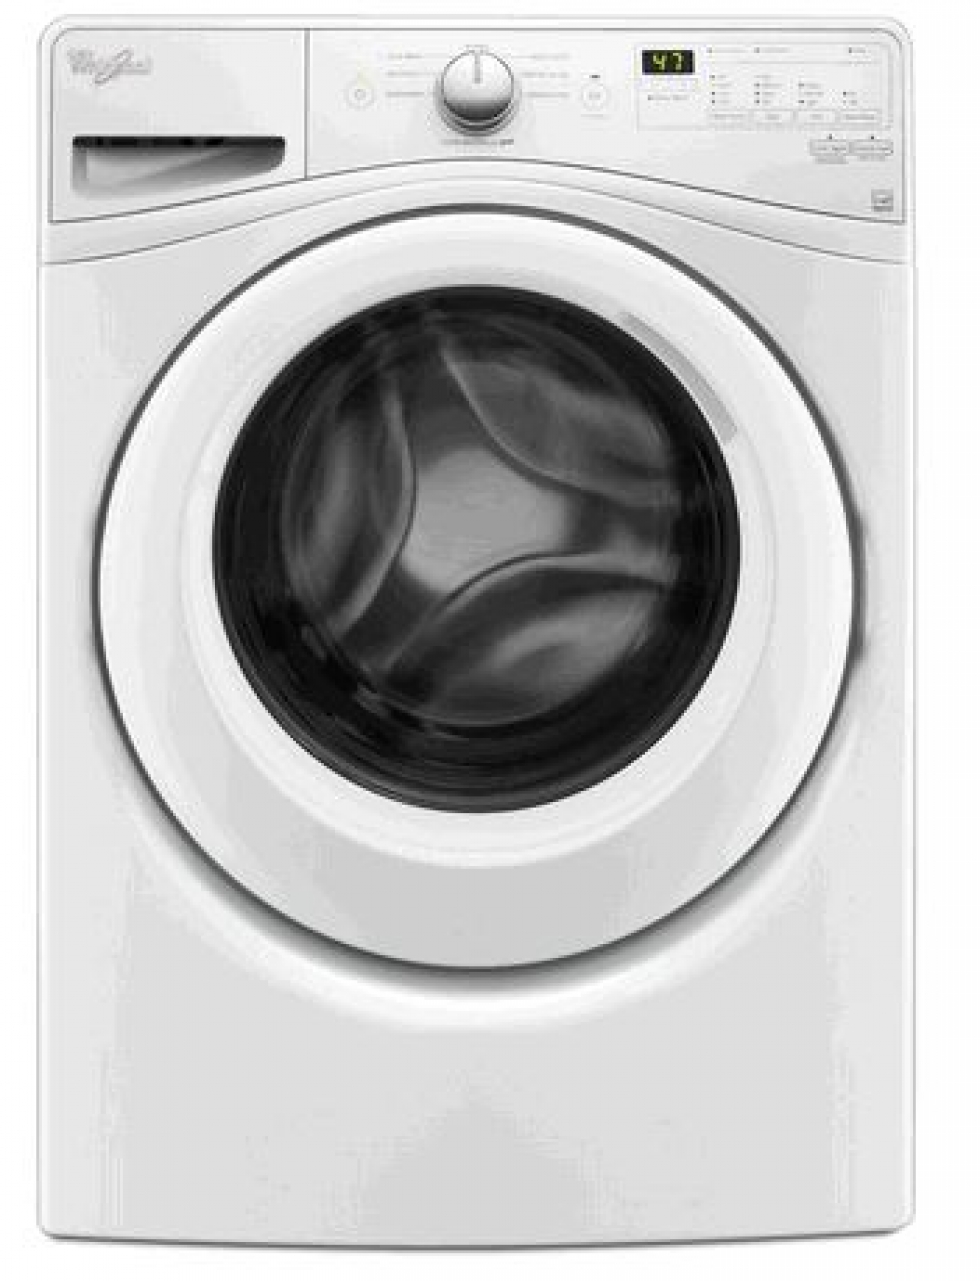 5.2 cu. ft. I.E.C. Front Load Washer with Precision Dispense